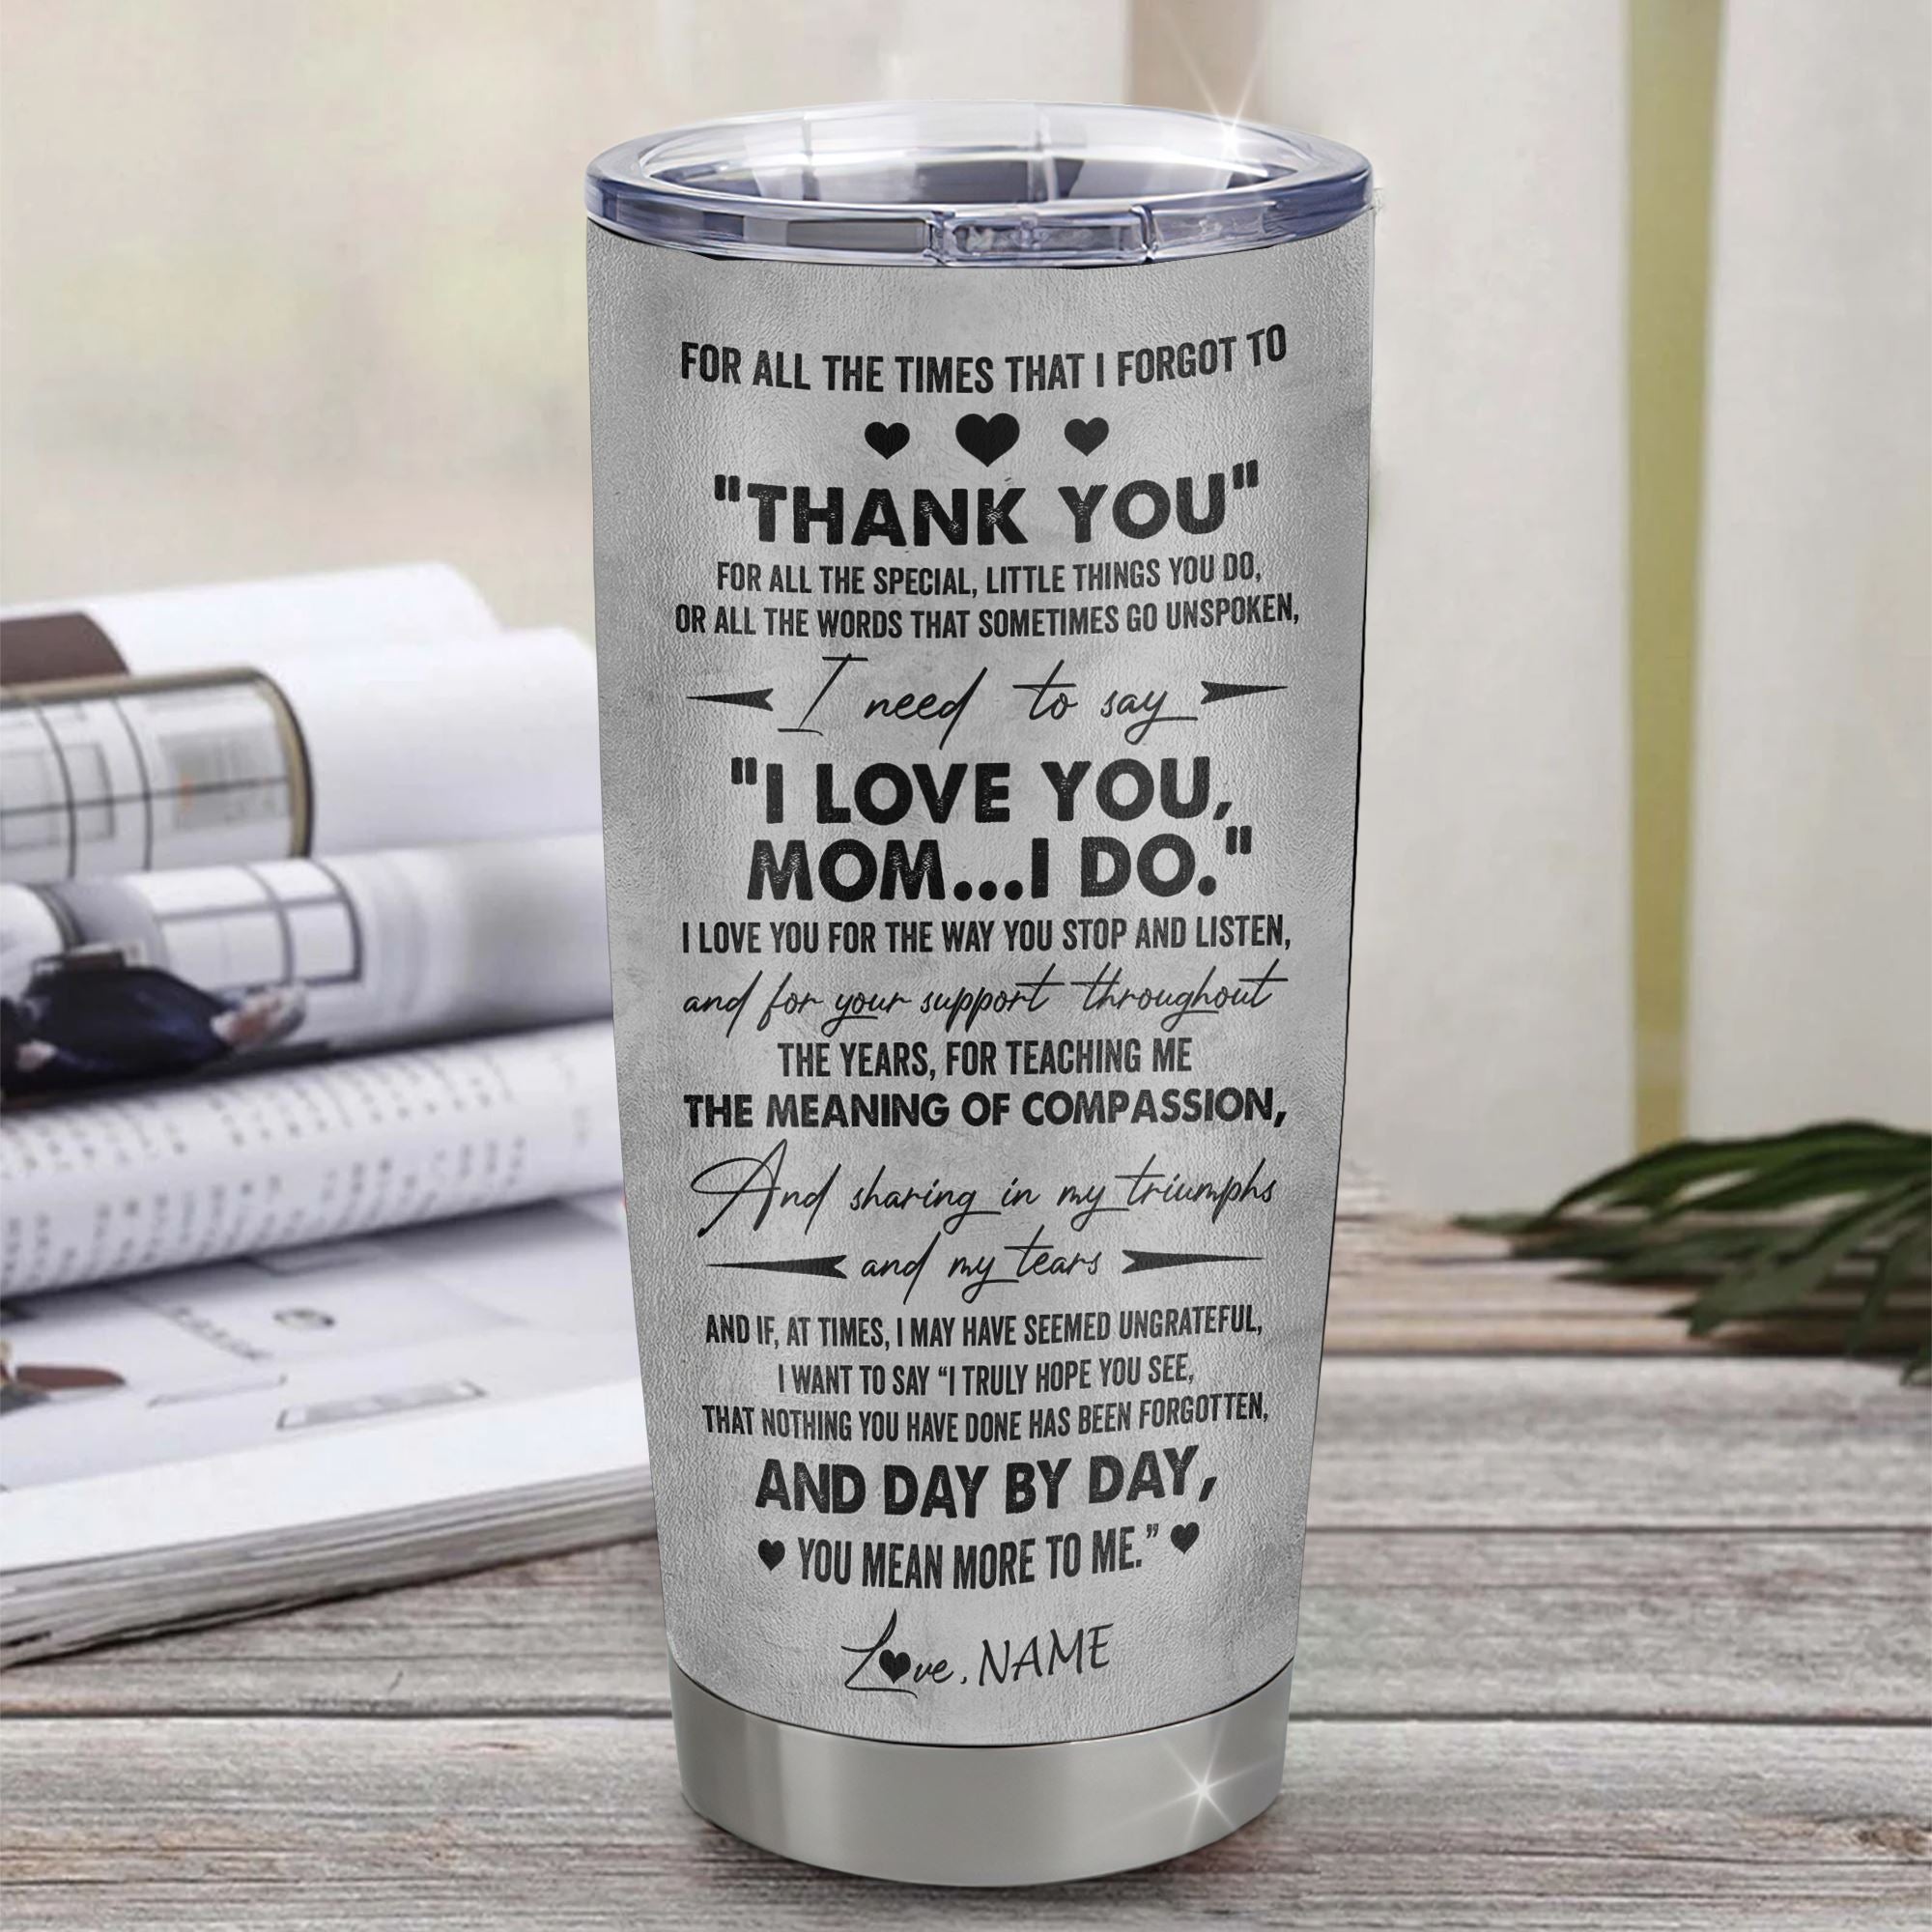 Mother's Day Tumbler Engraved